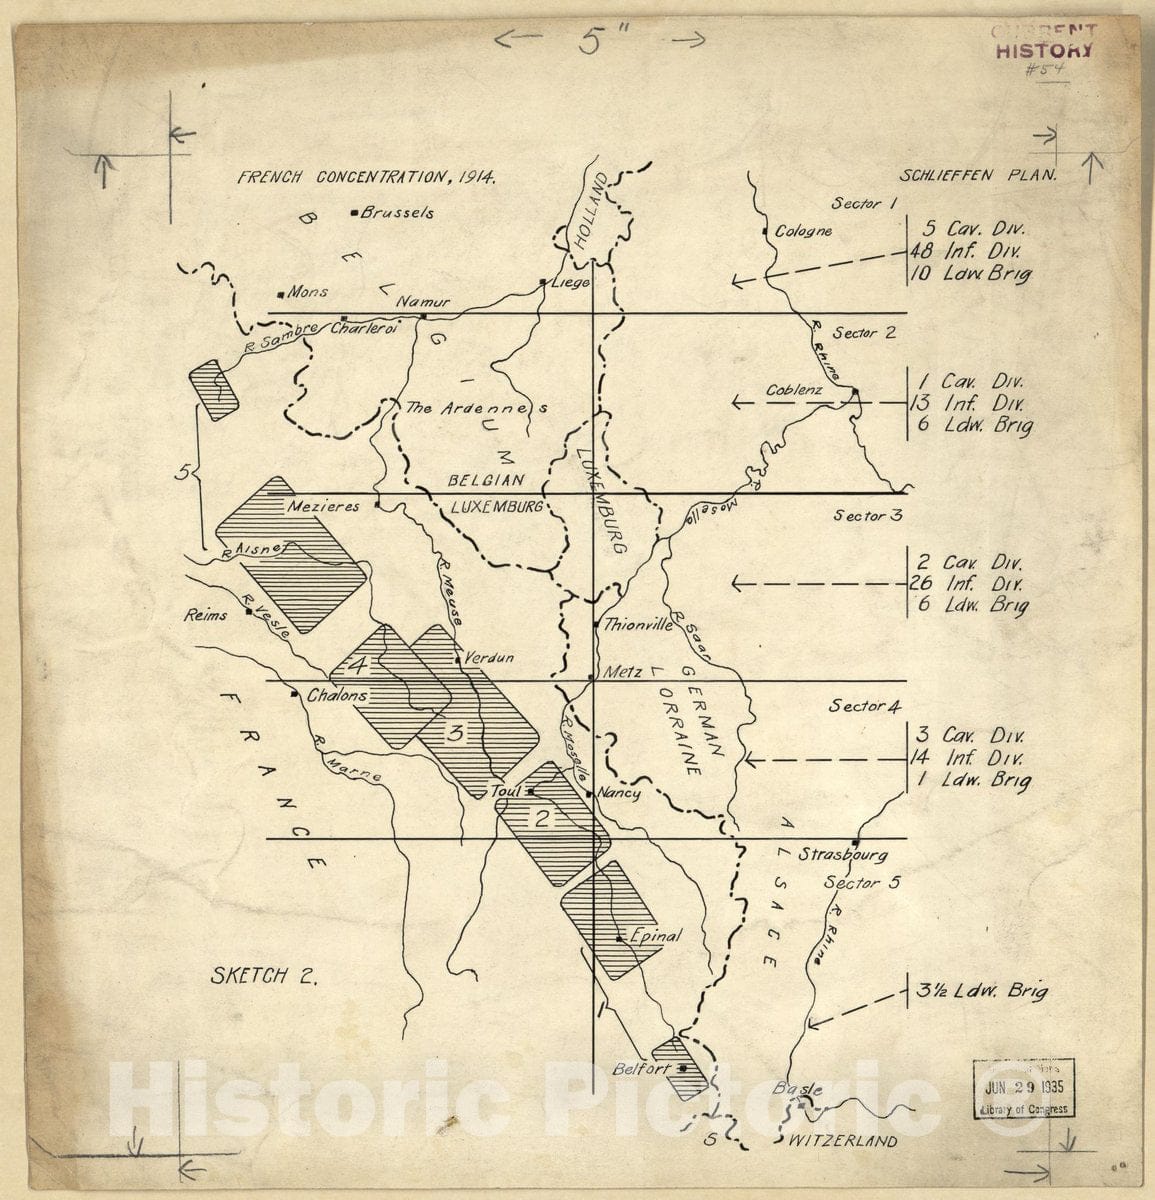 Historic 1916 Map - Tasker Howard Bliss Collection of World War I maps and Other Related Graphic Materials